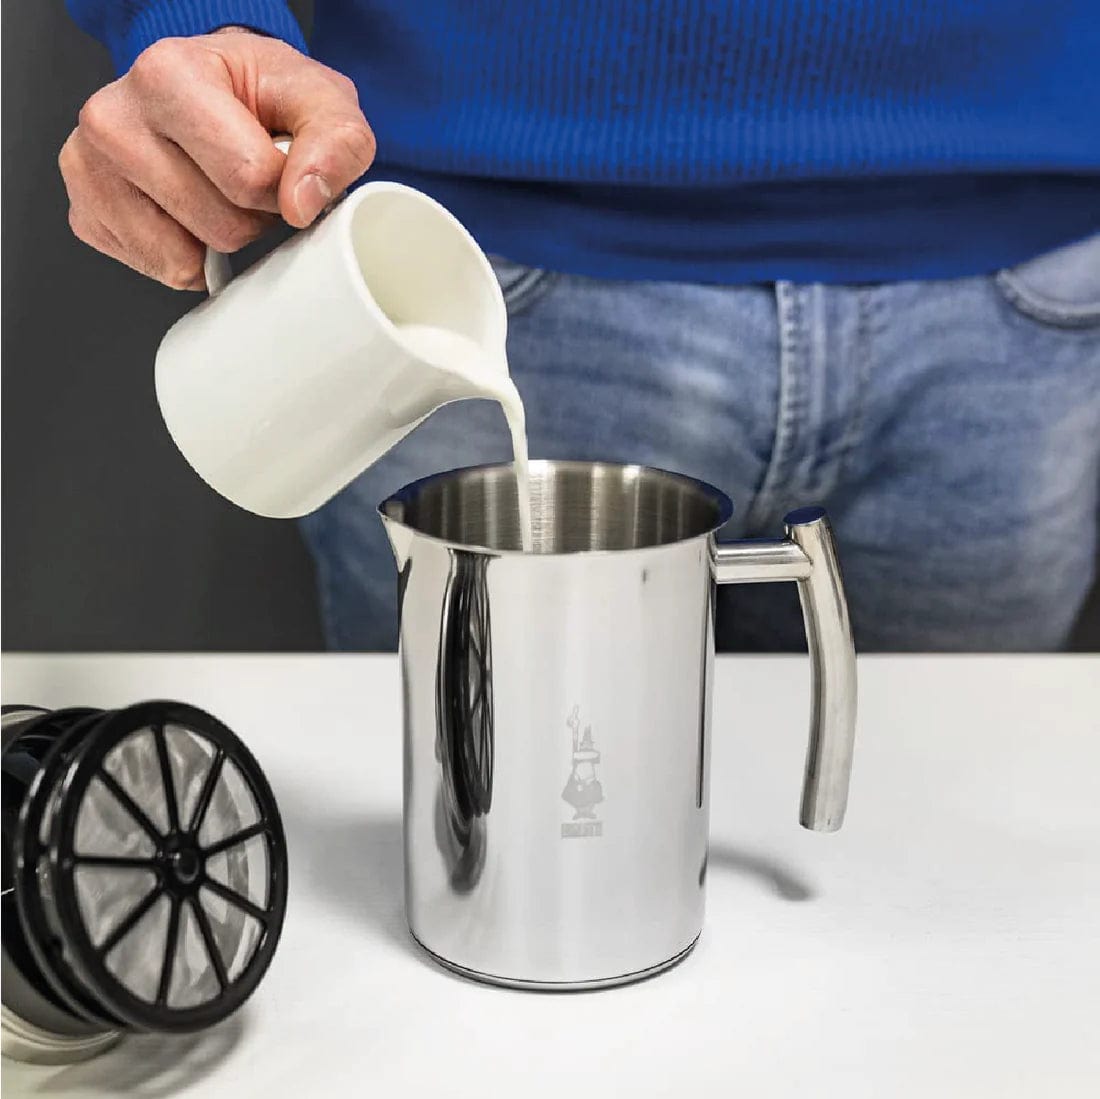 Bialetti Stainless Steel Milk Frother